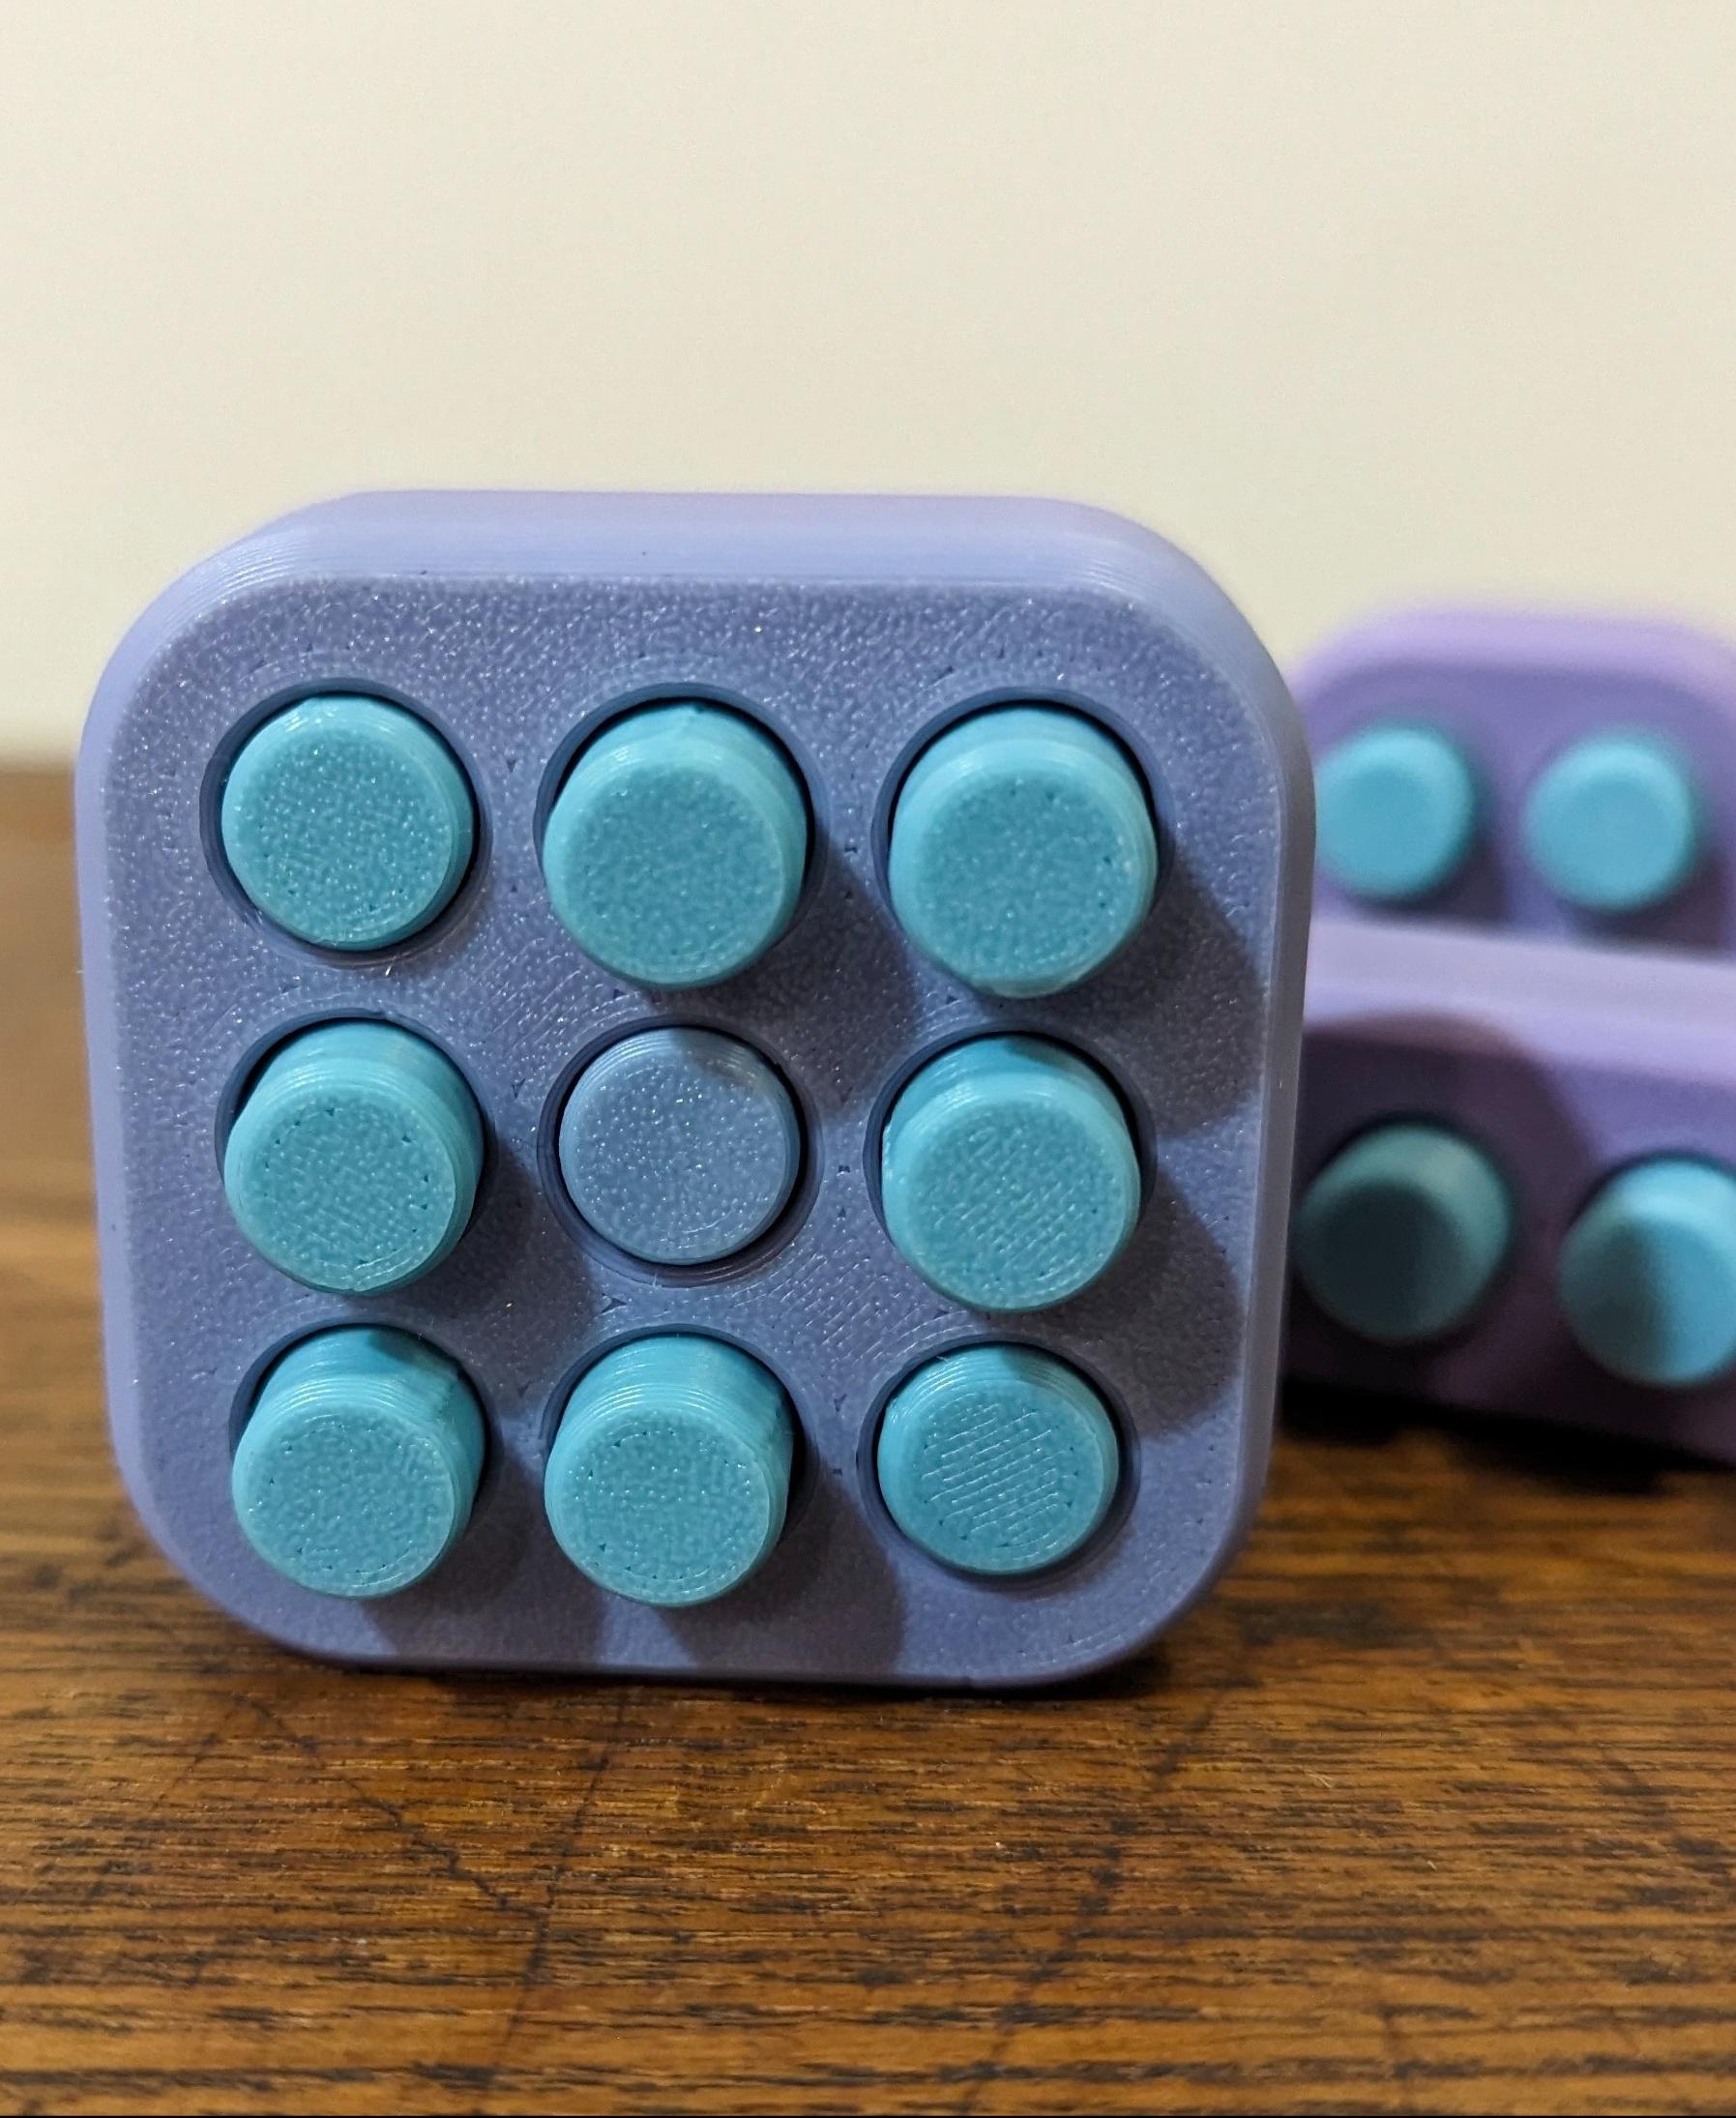 Pop Fidget (Multi-material design) - These were fun to print....once I realized I had somehow flipped one of the cases upside down.  (Can't put in the tpu gasket that way, lol)

Used @SliceWorx3D Aquarius for the cases and the buttons.

@HATCHBOX3D Digital Blue TPU 95A

https://youtube.com/shorts/oOTHZYqV7ug?si=ZDFCgWfSwW28kseB - 3d model